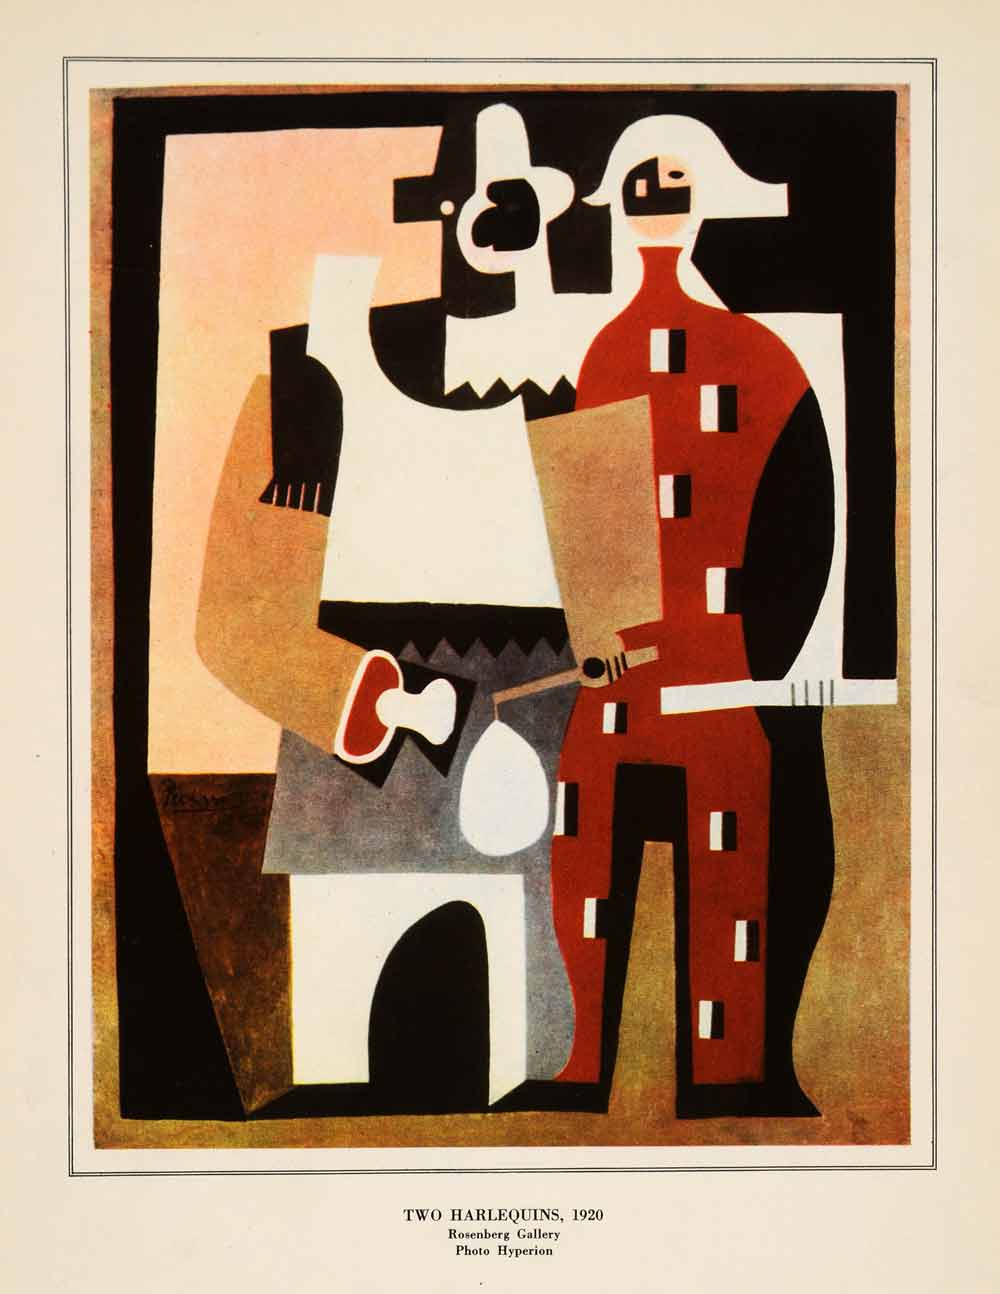 1940 Photolithograph Pablo Picasso Harlequin 1920 Modern Abstract Art Rosenberg